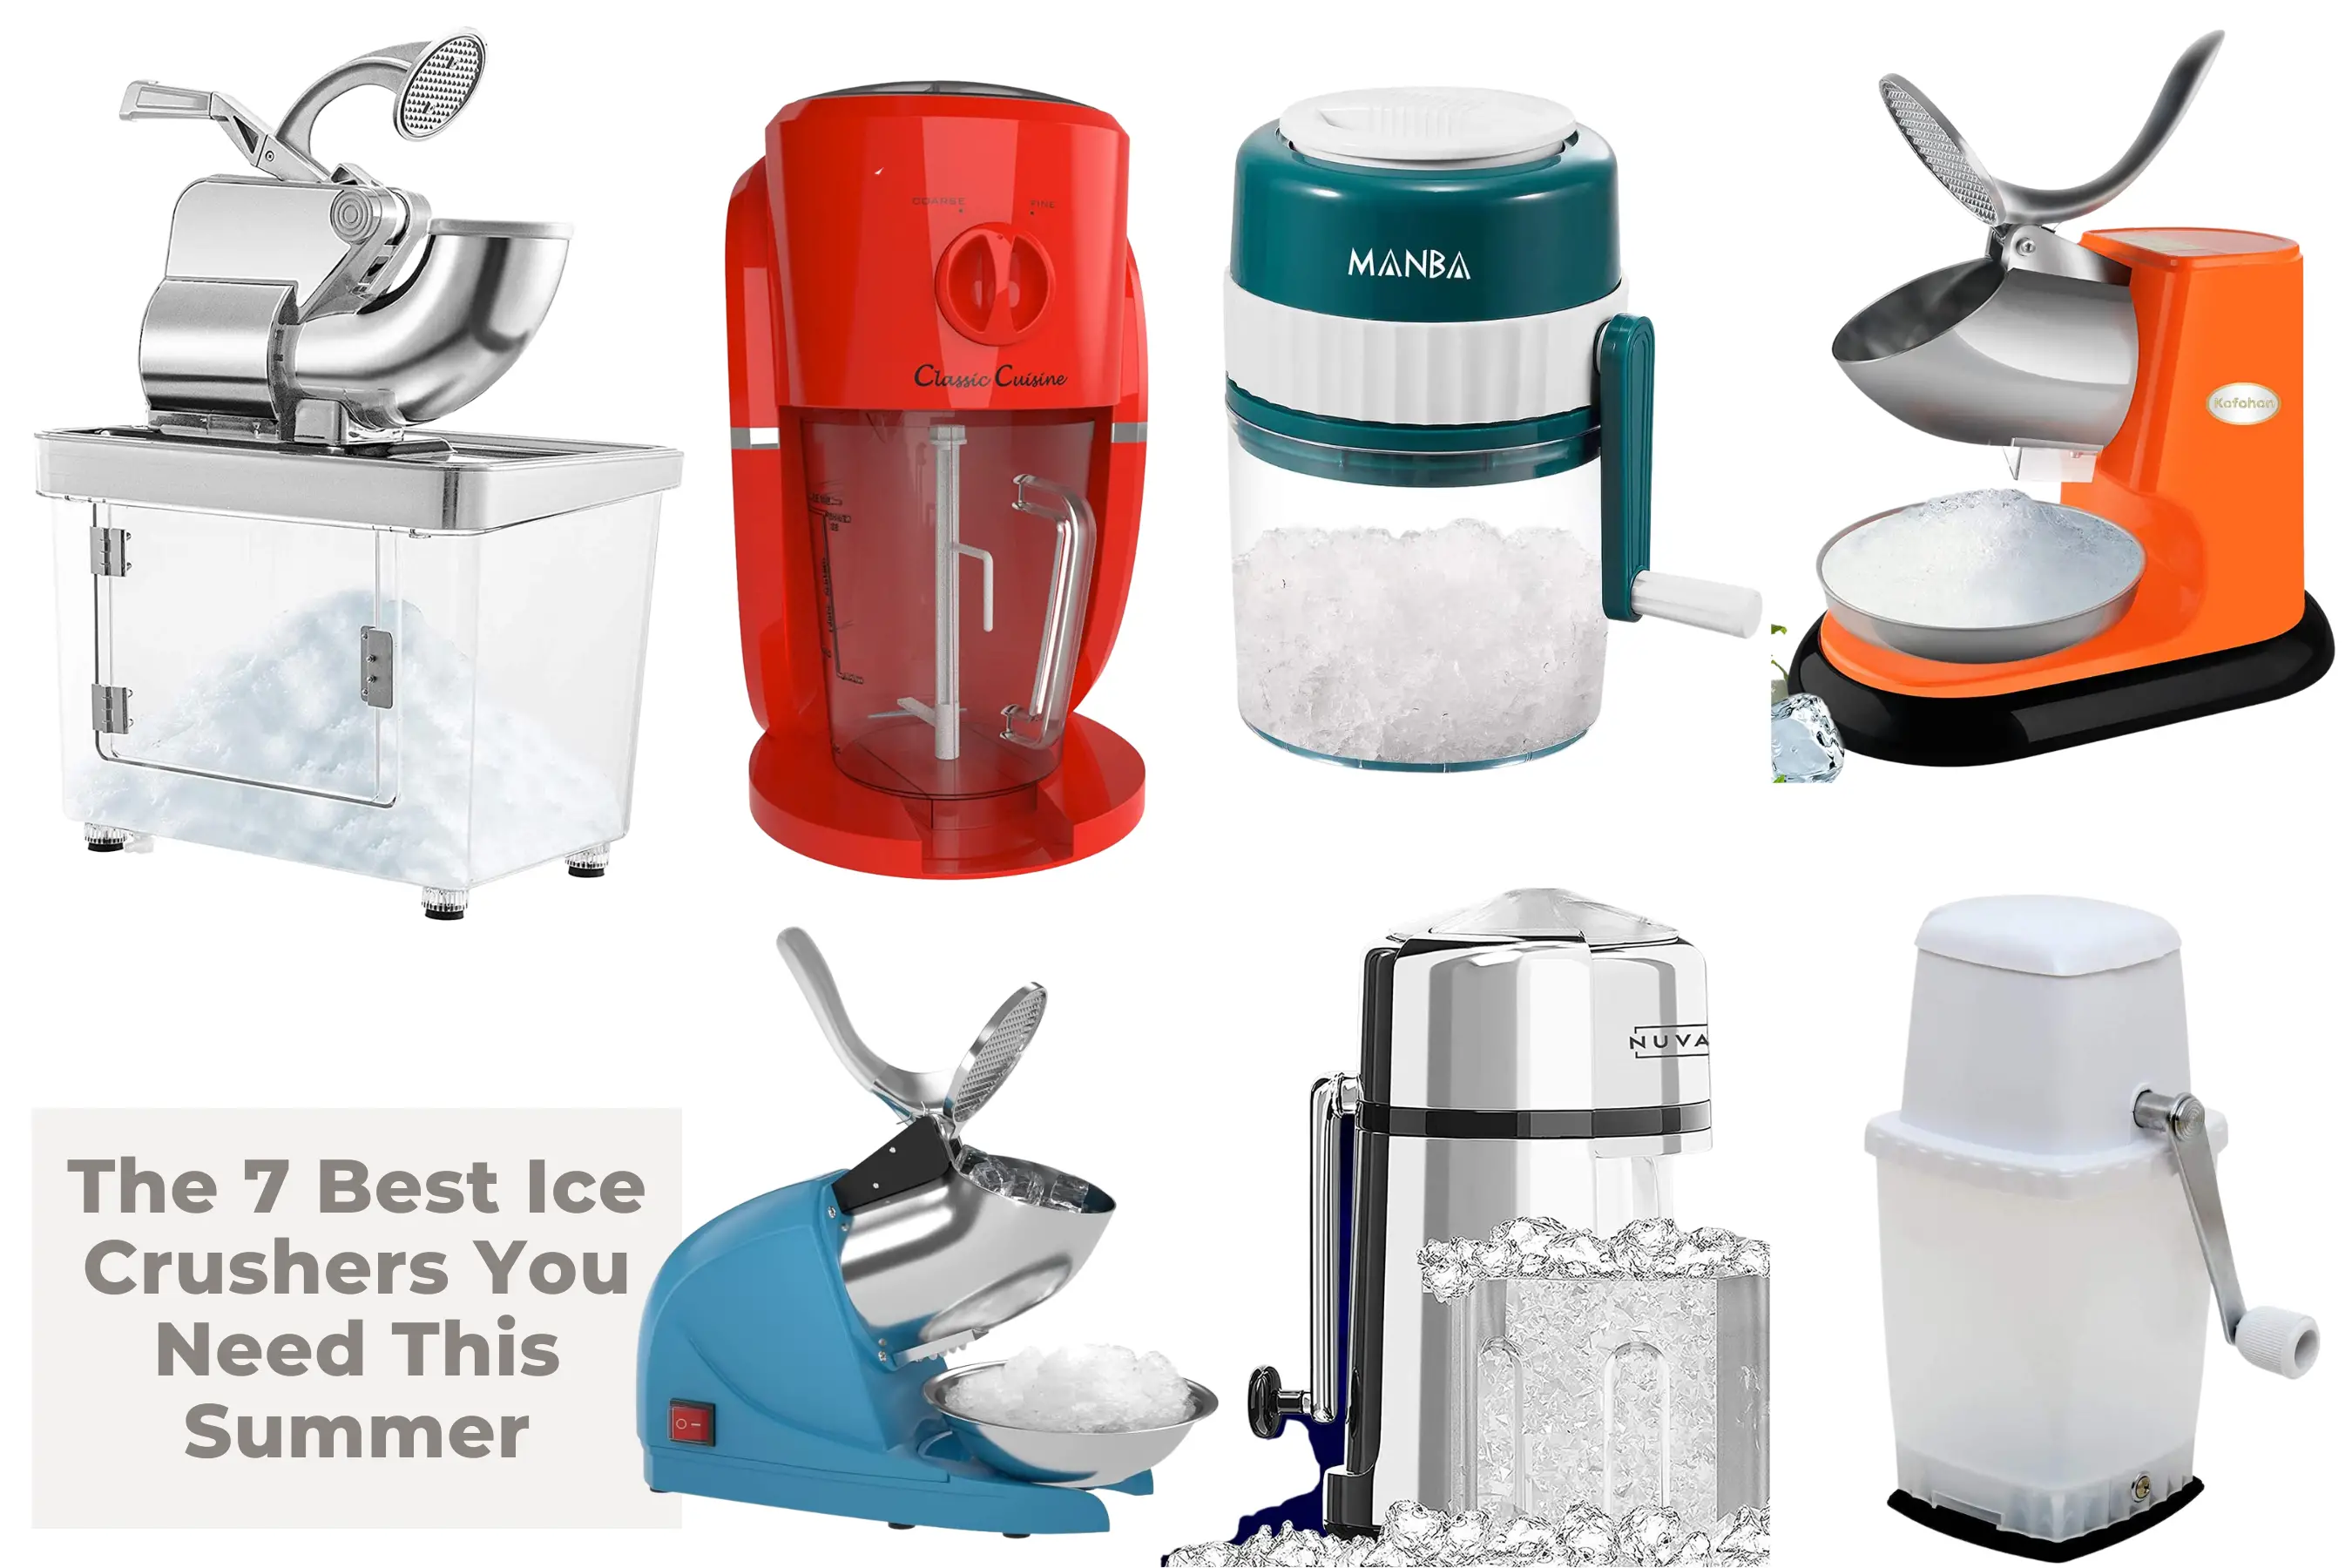 The 7 Best Ice Crushers You Need This Summer